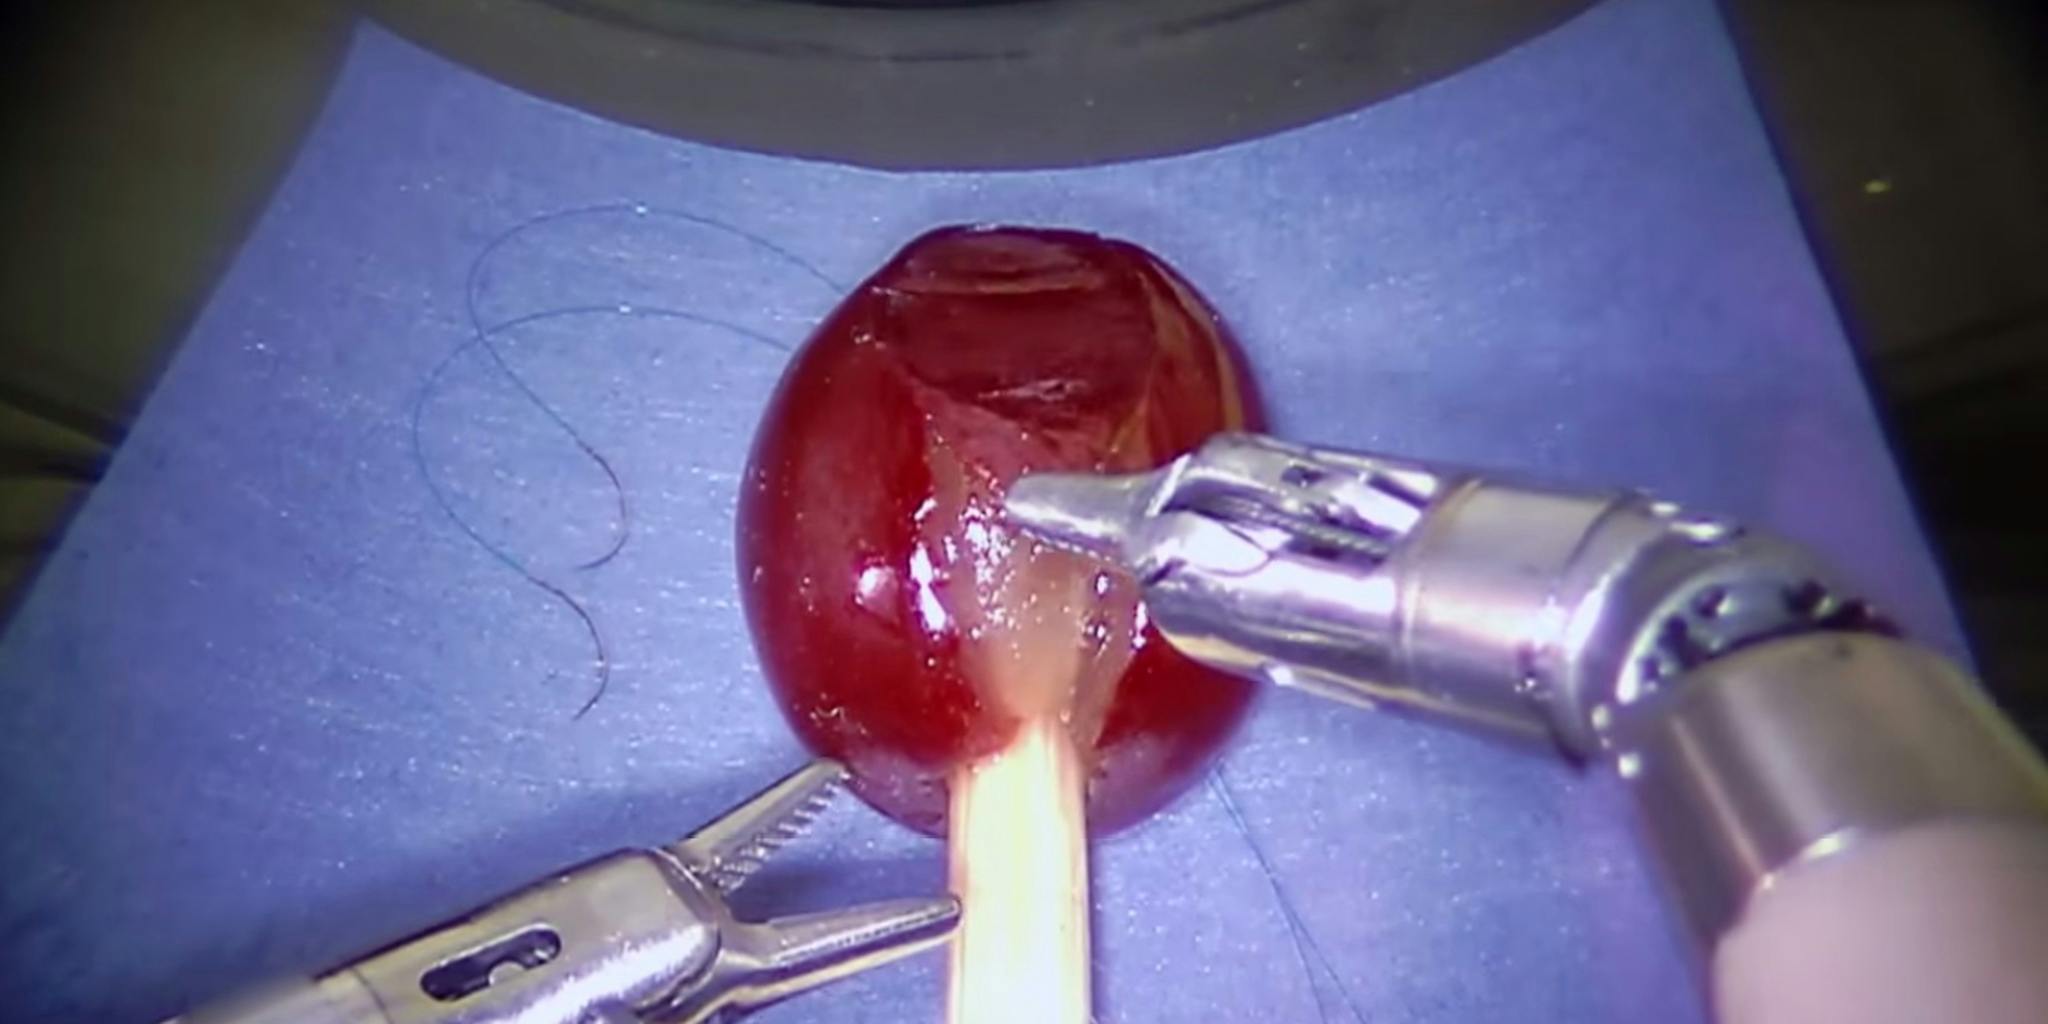 tankevækkende kaos kommando Tiny robot practices surgery on a wounded grape - The Daily Dot